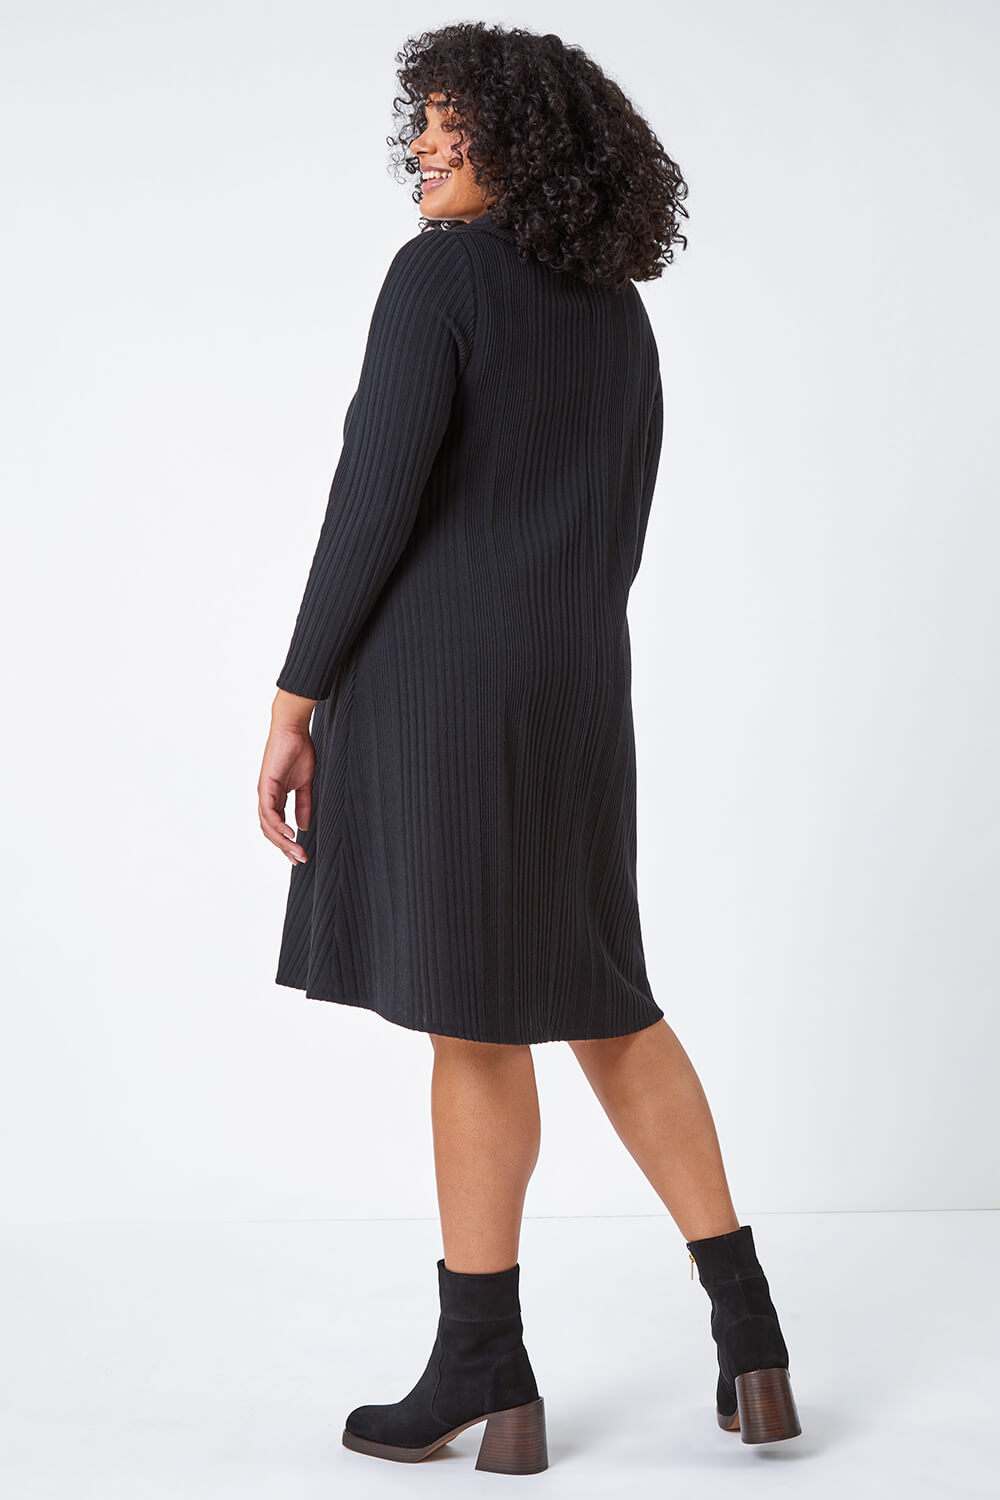 Black Curve Roll Neck Ribbed Stretch Dress, Image 3 of 5